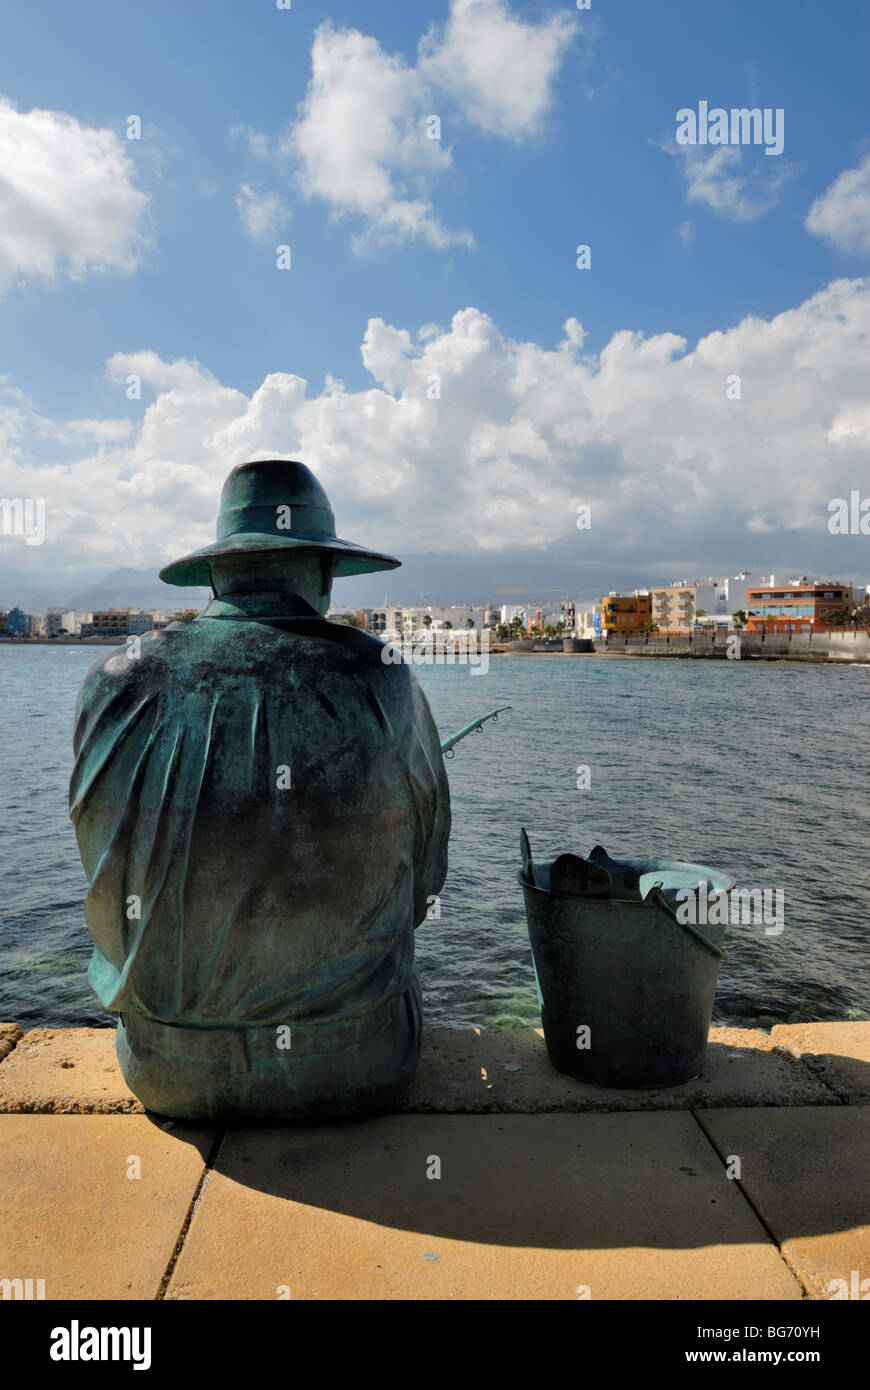 A sculpture of a fisherman on the pier of the small coastal town of Arinaga. Arinaga, Gran Canaria, Canary Islands, Spain, Europ Stock Photo